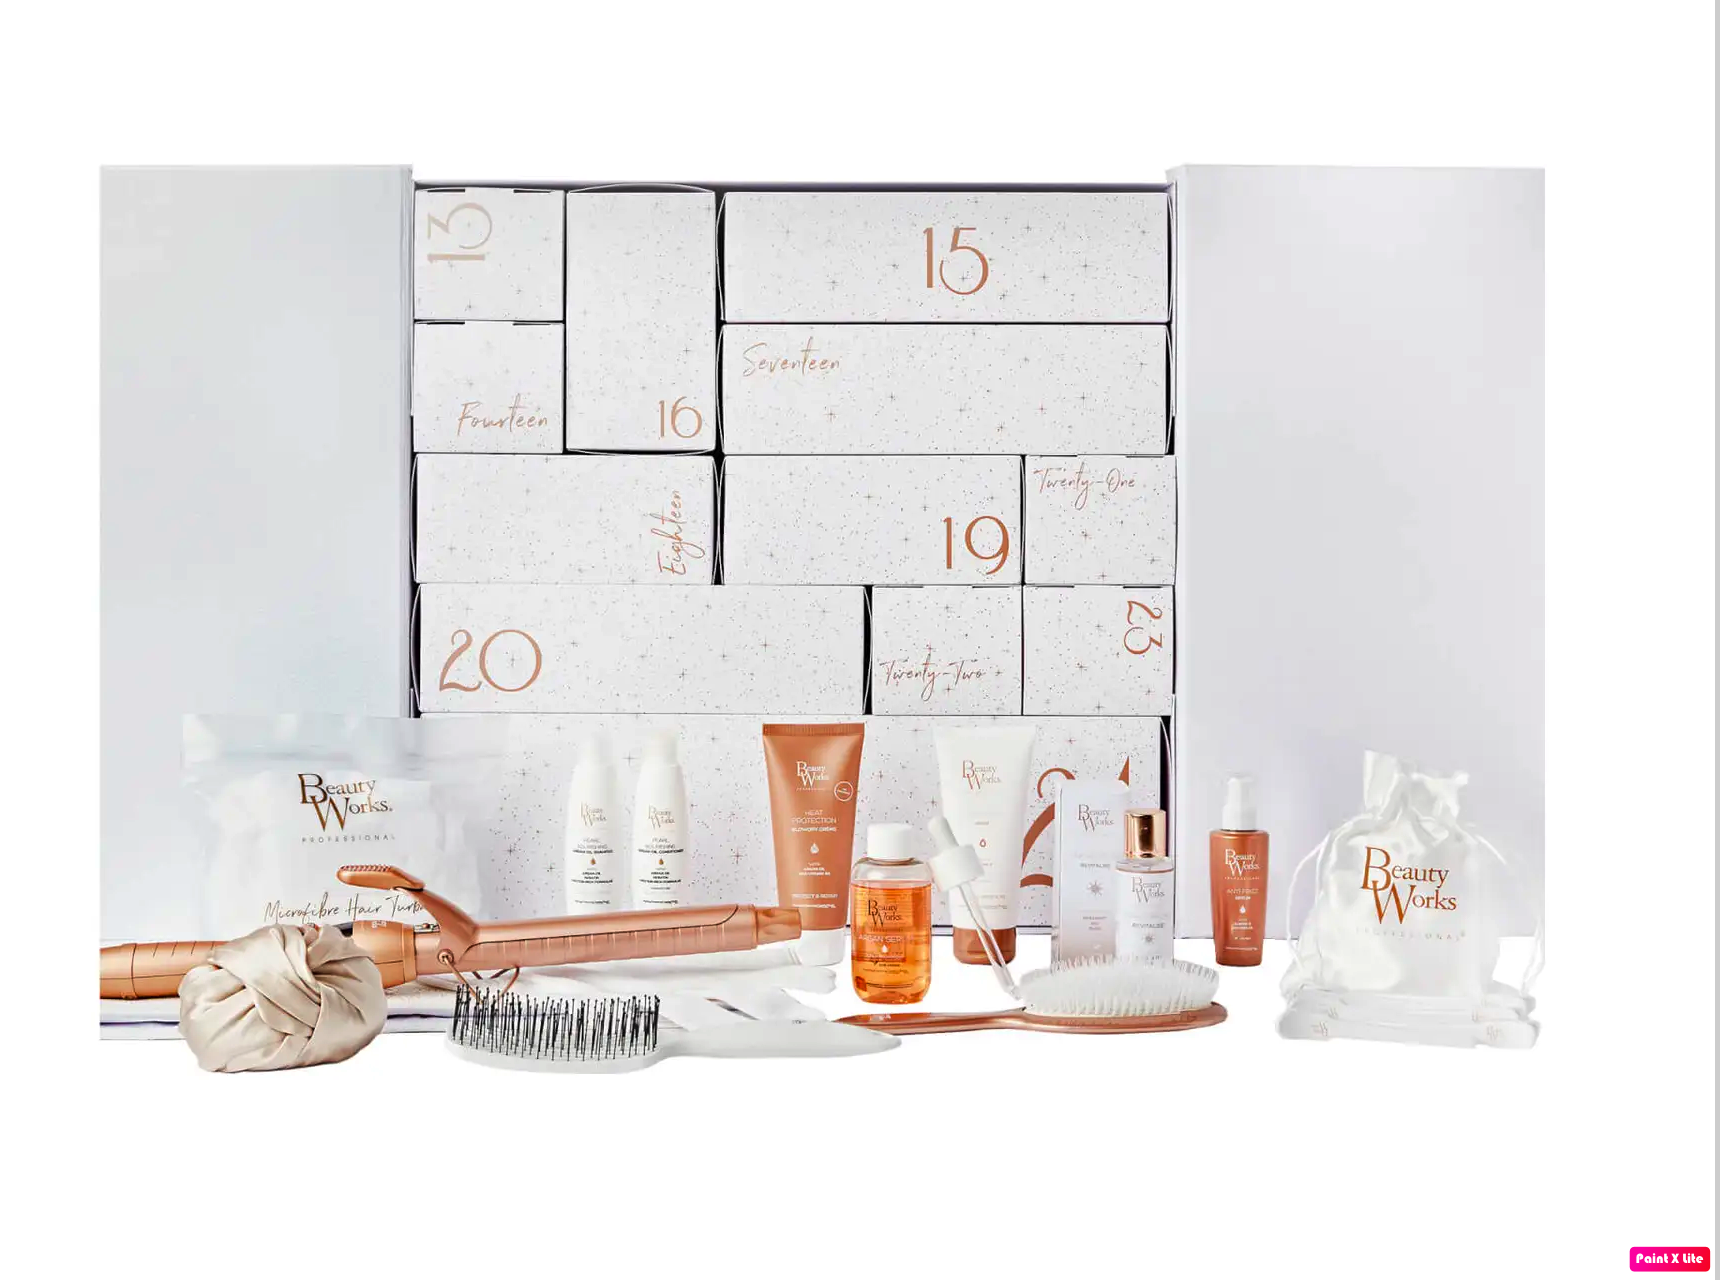 Beauty Works Advent Calendar Reviews Get All The Details At Hello